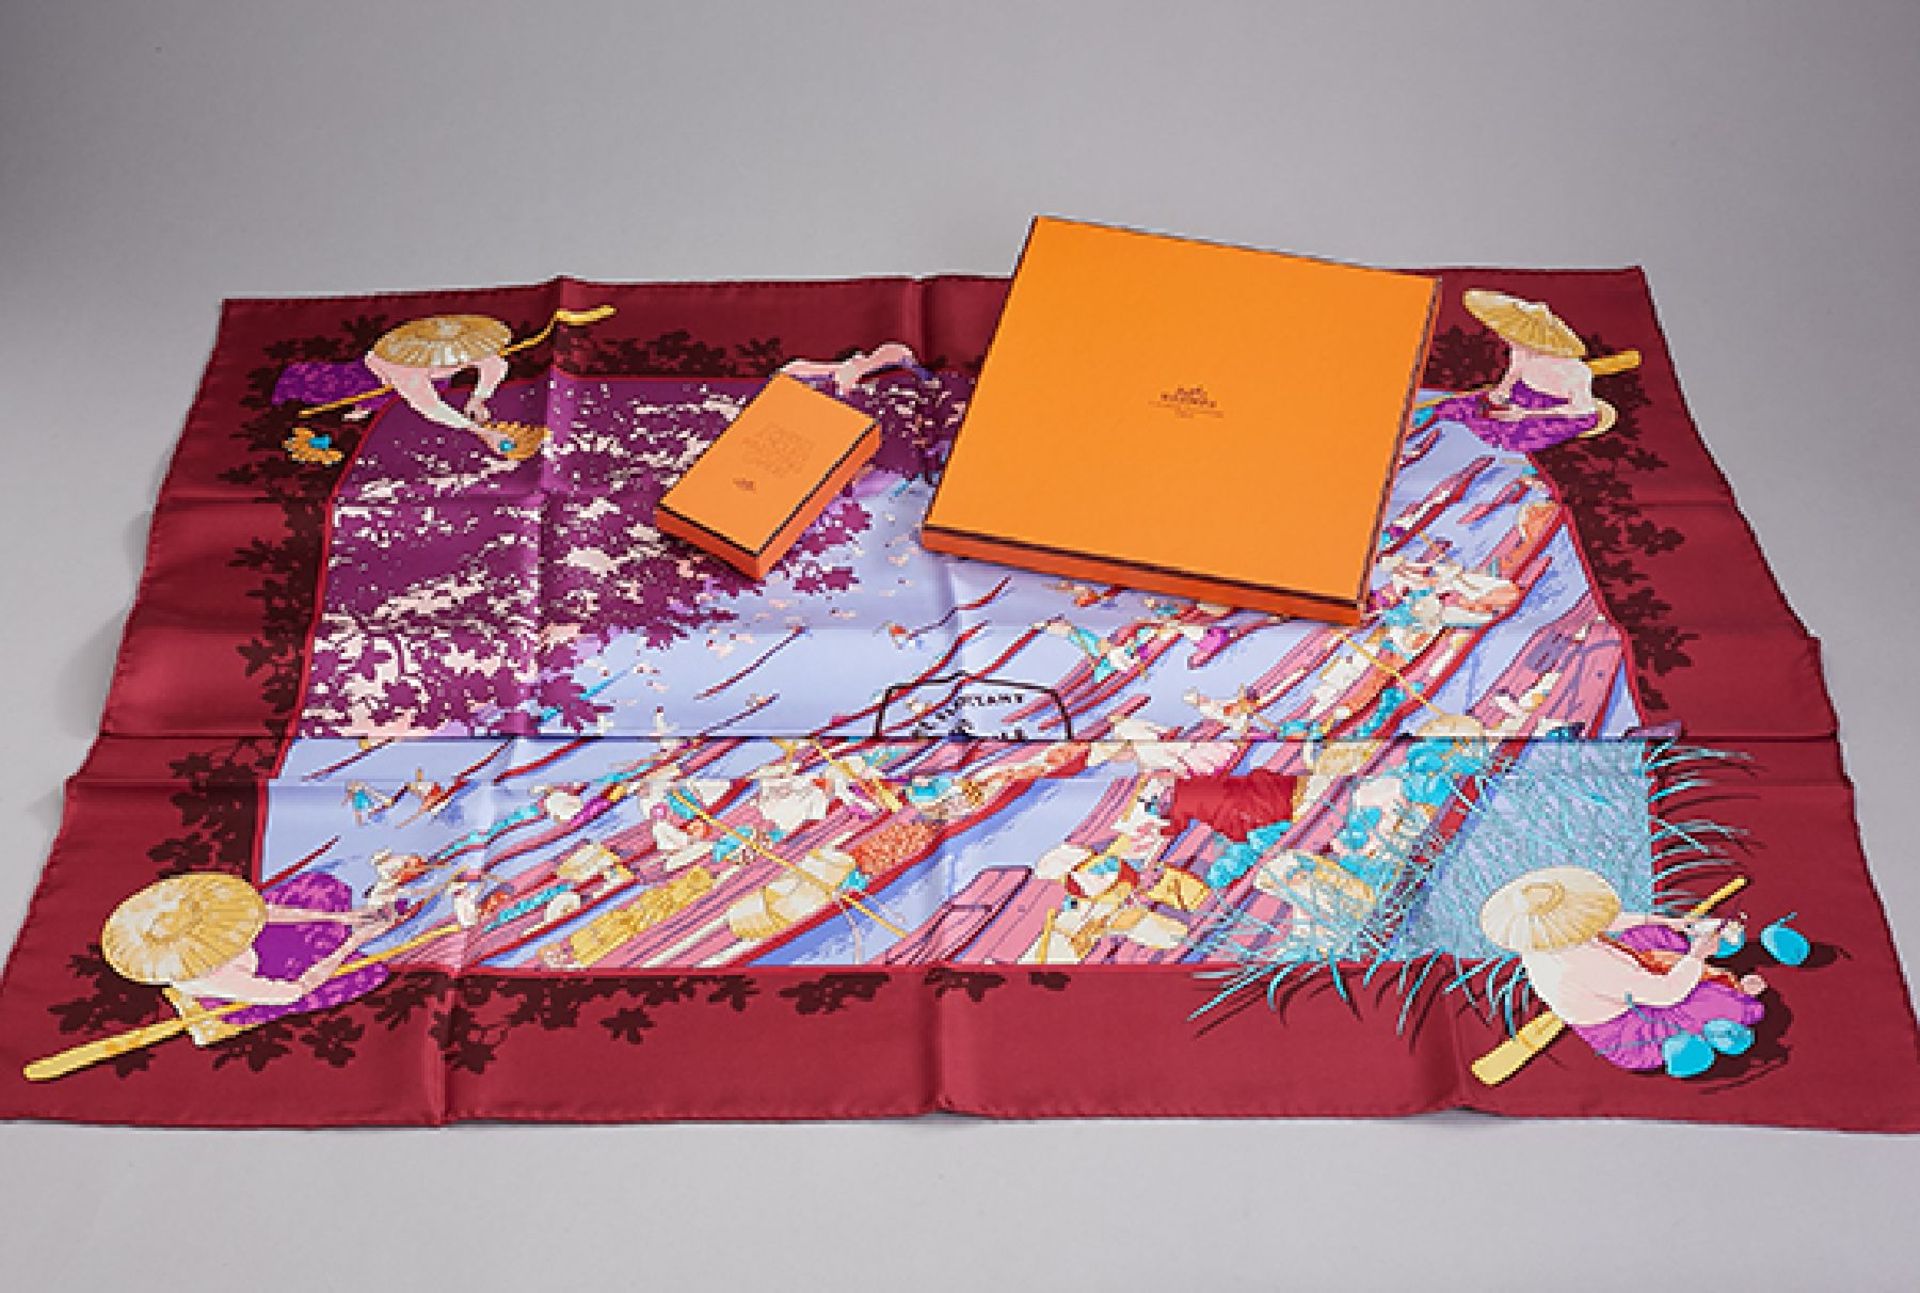 HERMES CARREE, 100 % silk, Made in France , "Marche Flottant du lac inle", lilac faced with